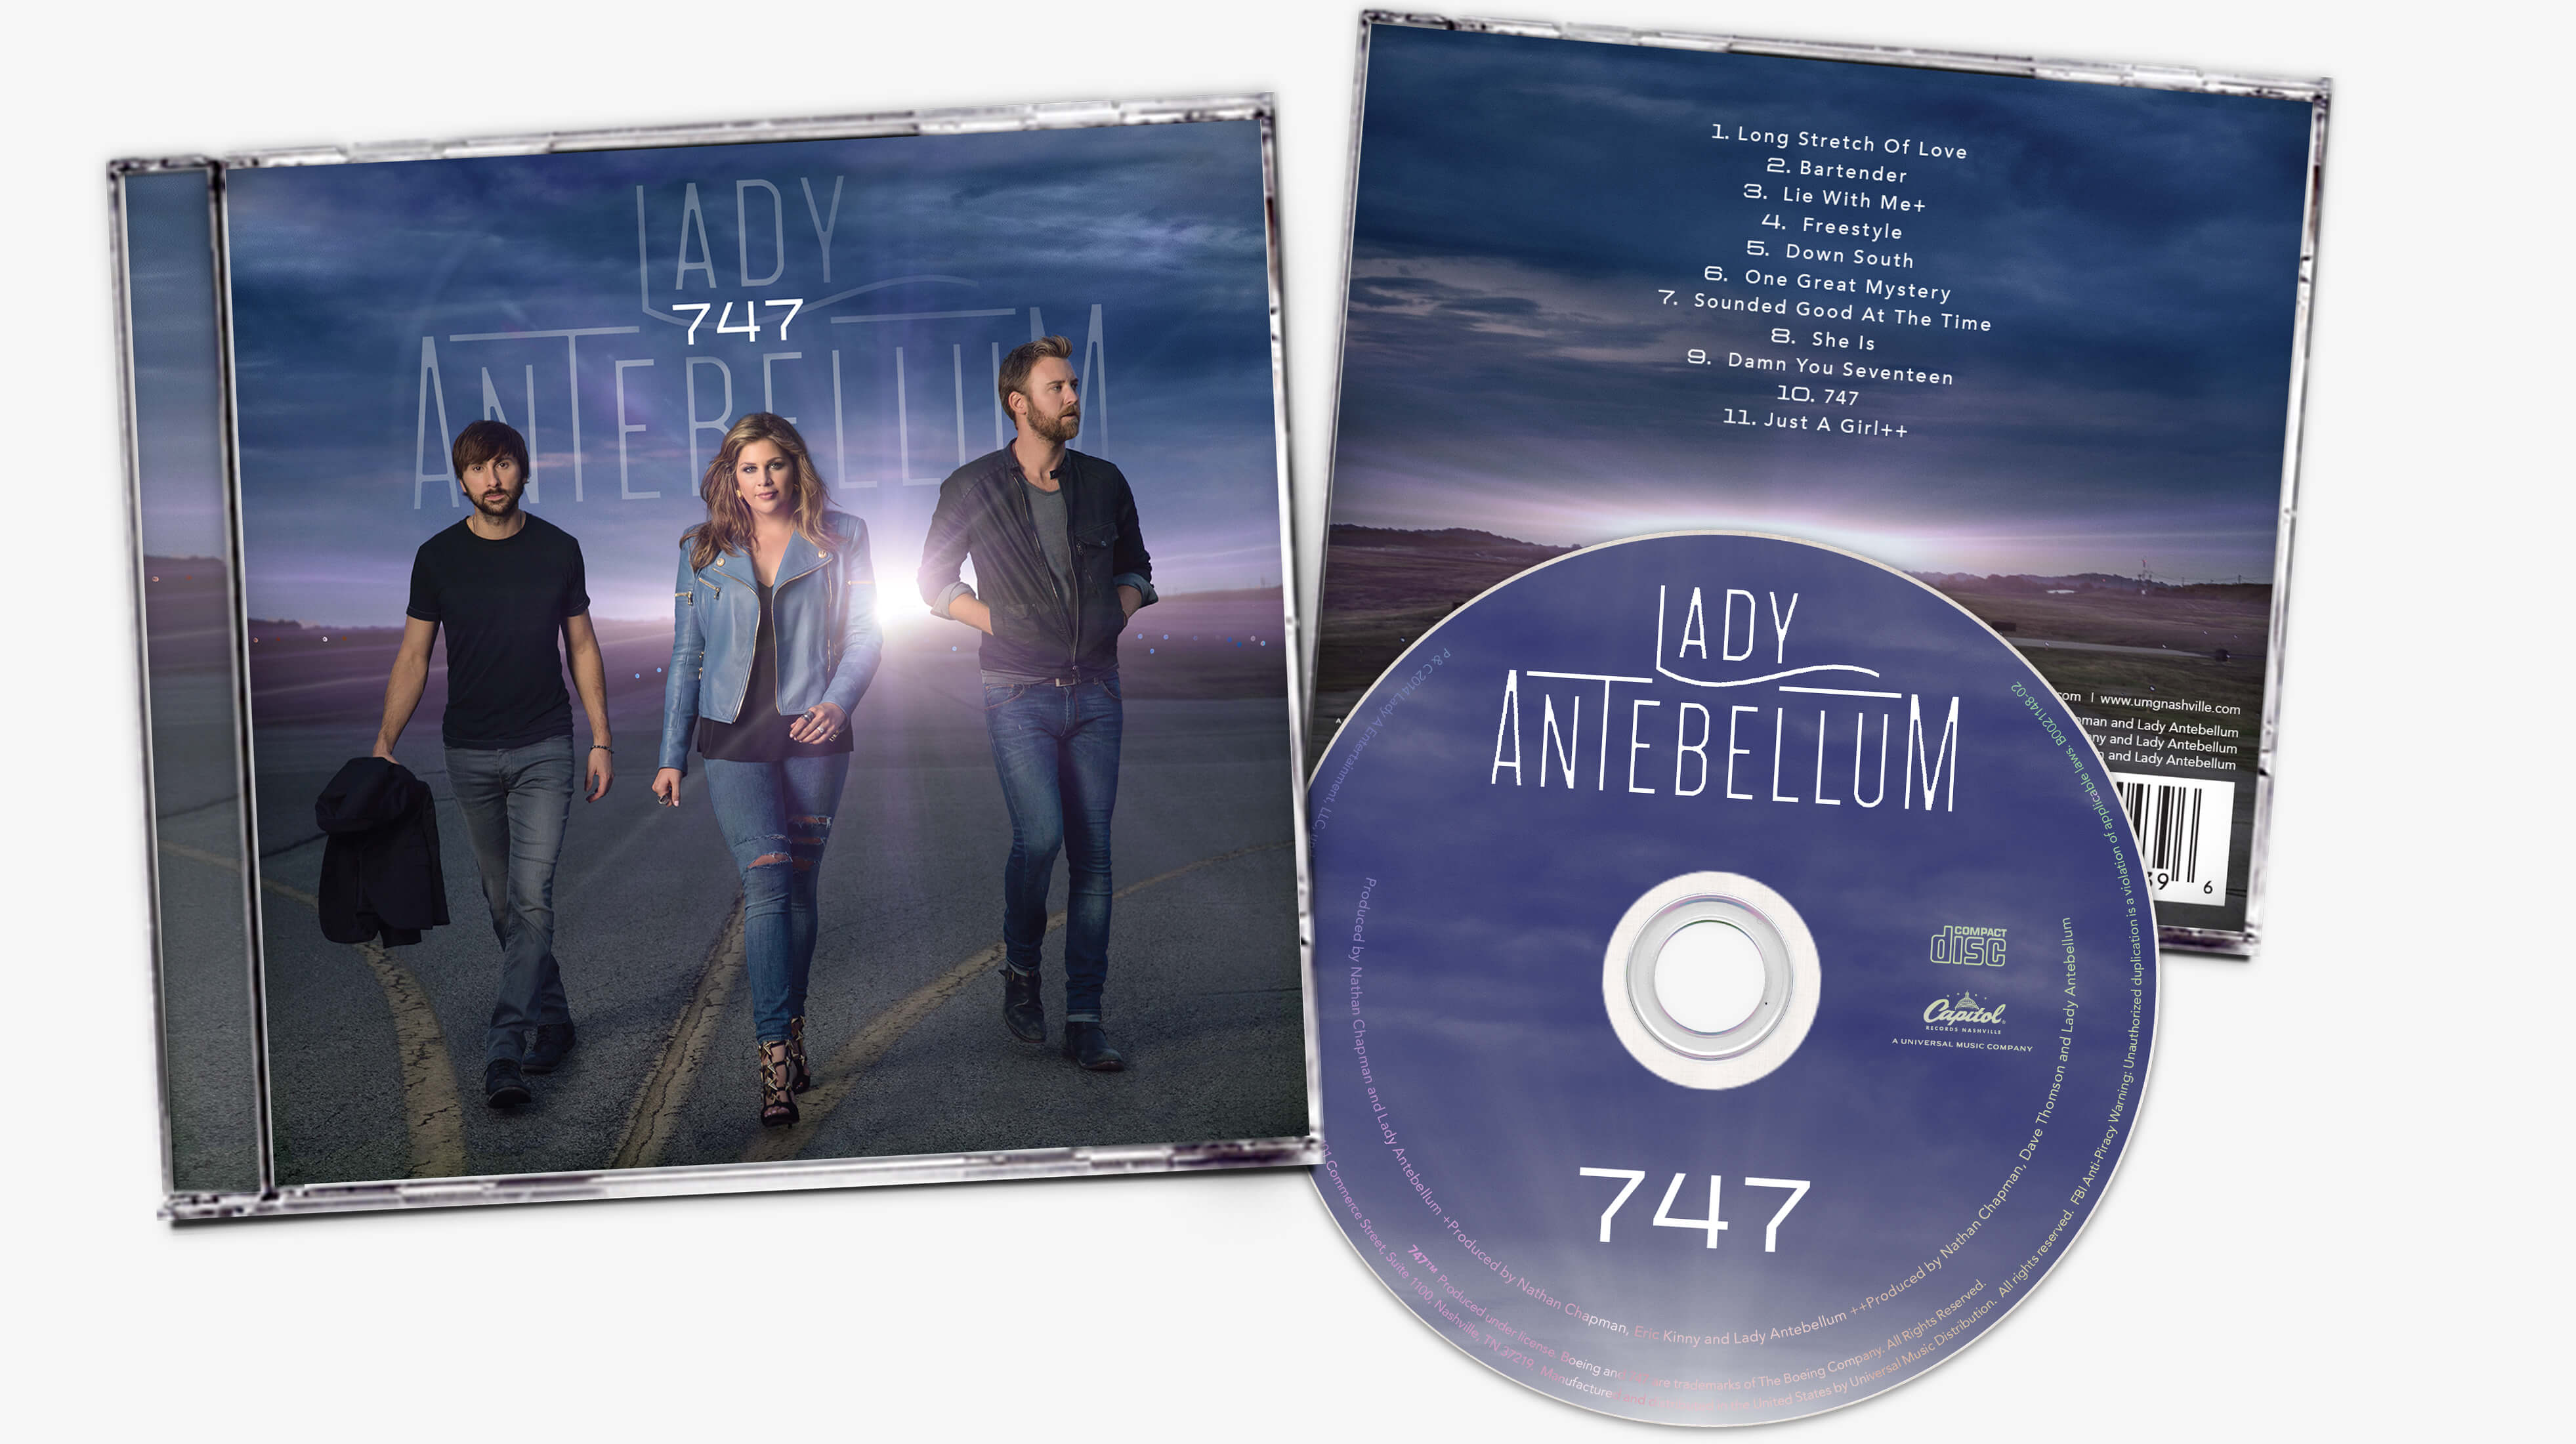 Album packaging design including cover, back cover and CD disk for Lady Antebellum 747